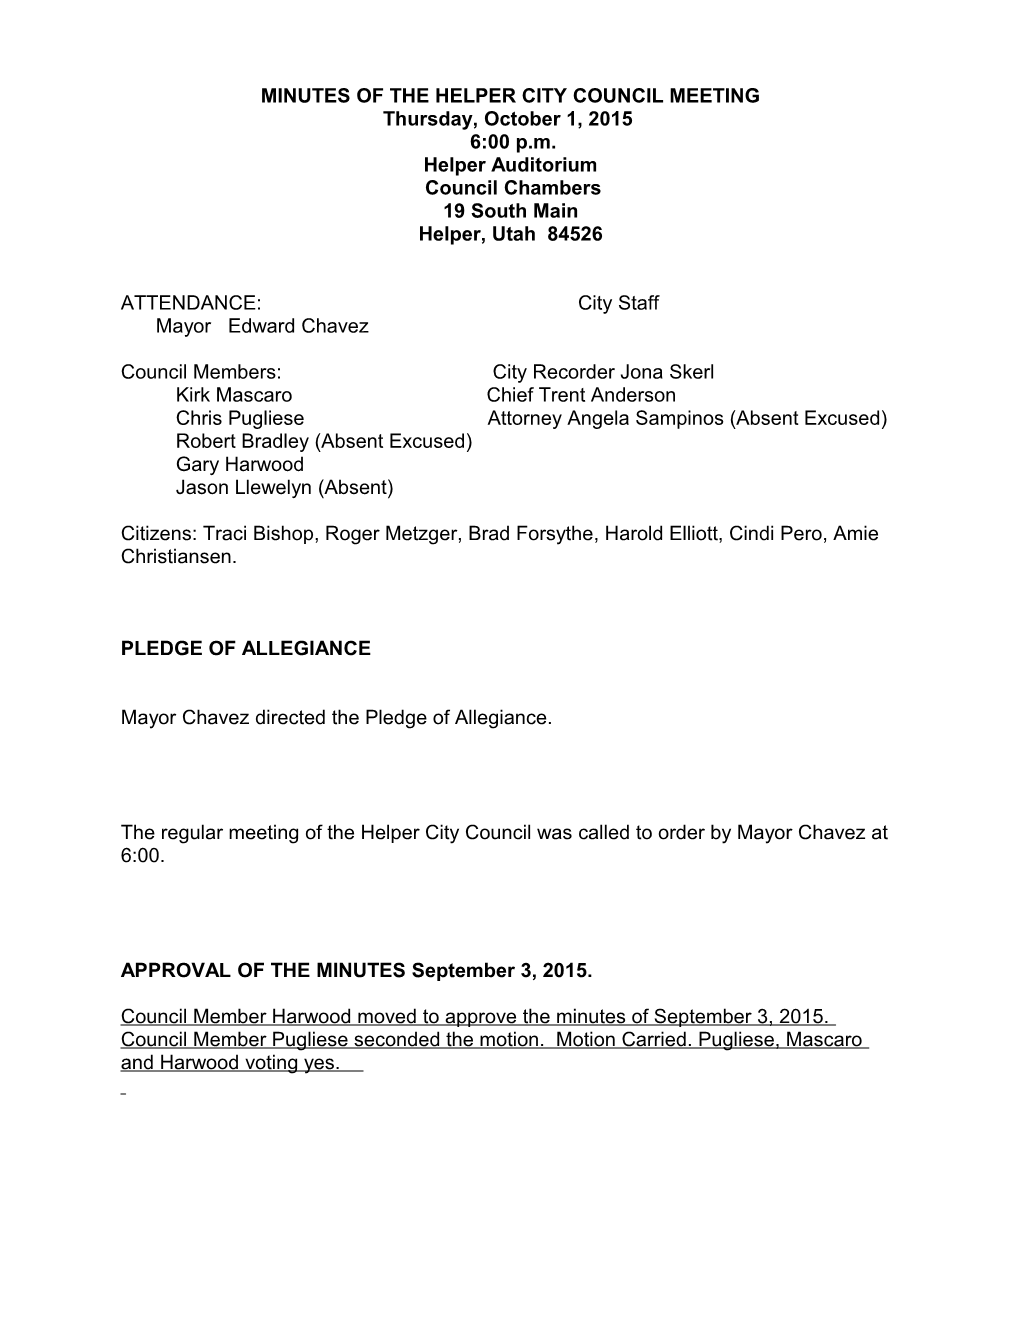 Minutes of the Helper City Council Meeting s1